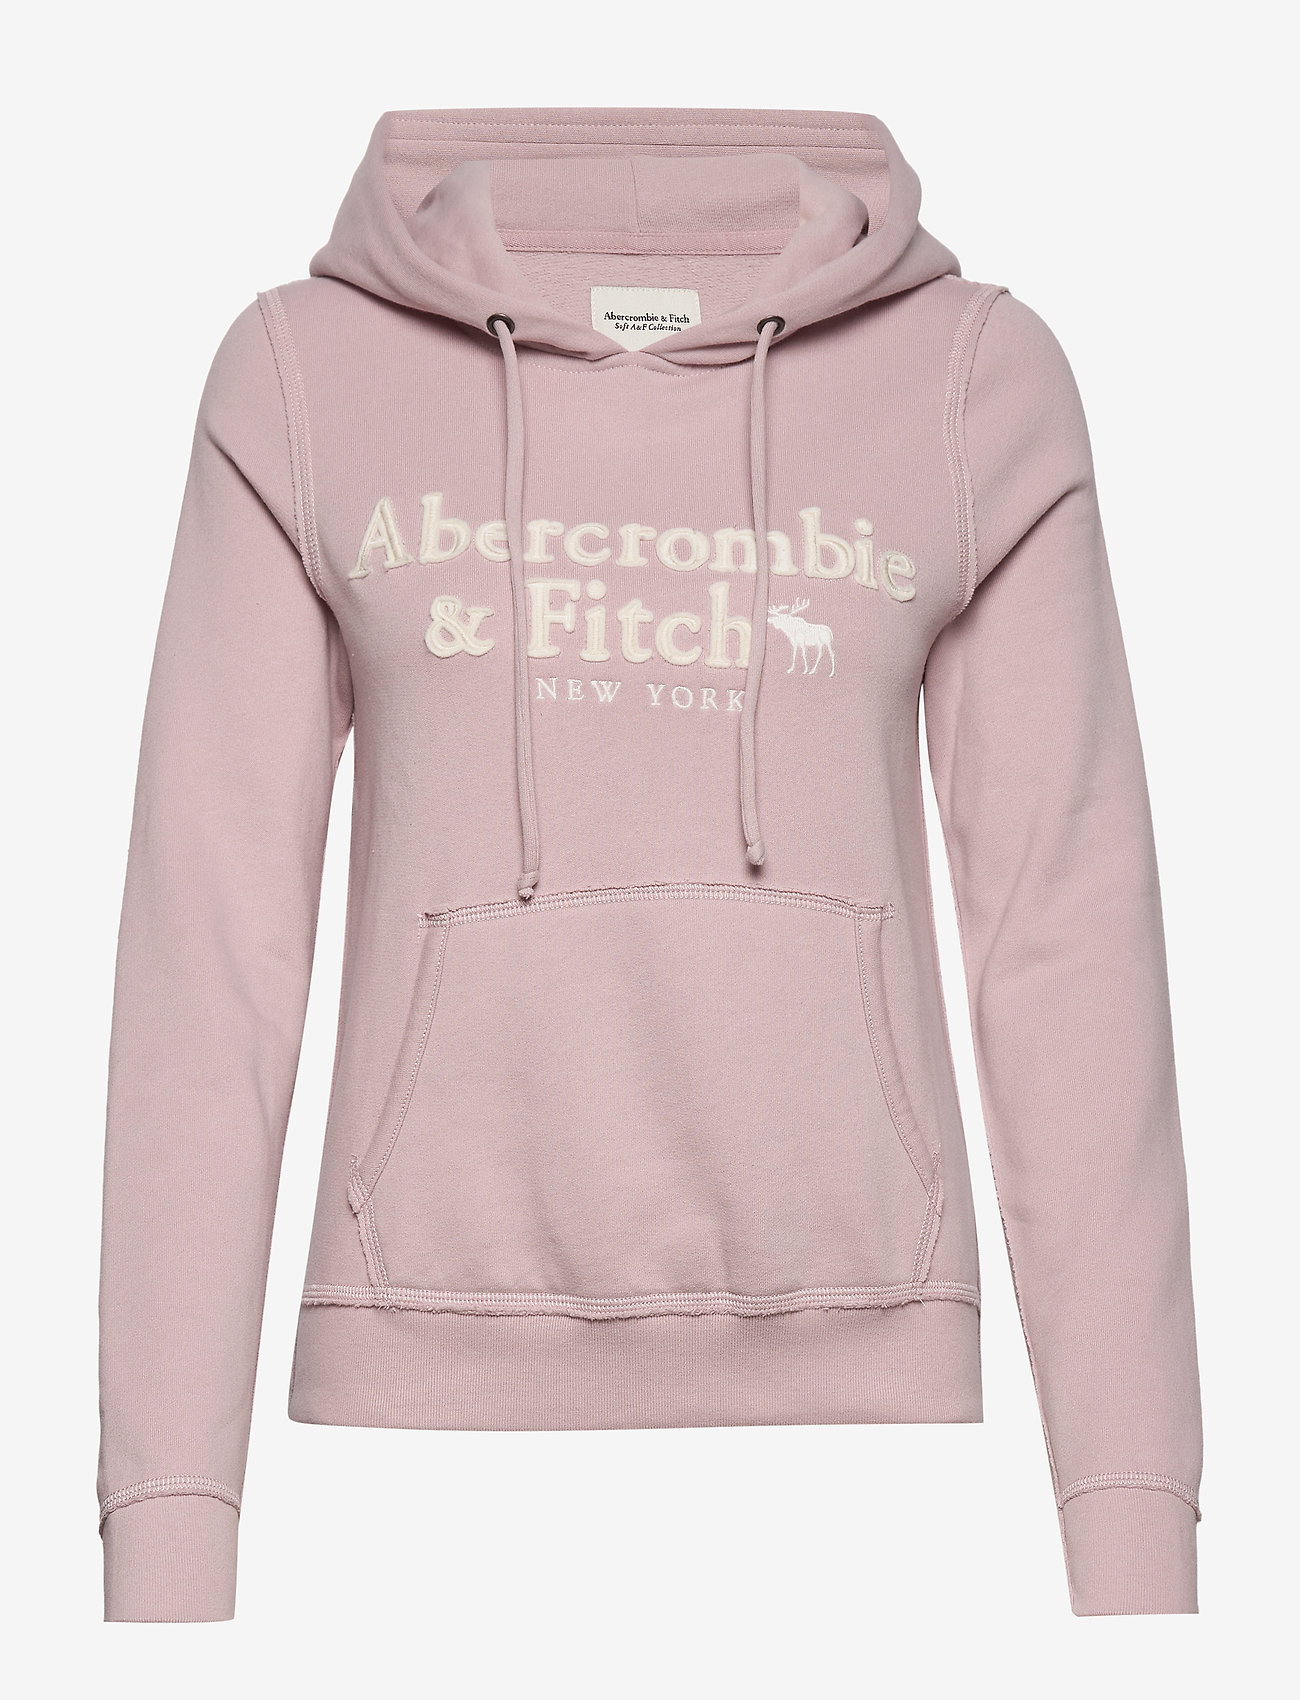 abercrombie and fitch hoodies